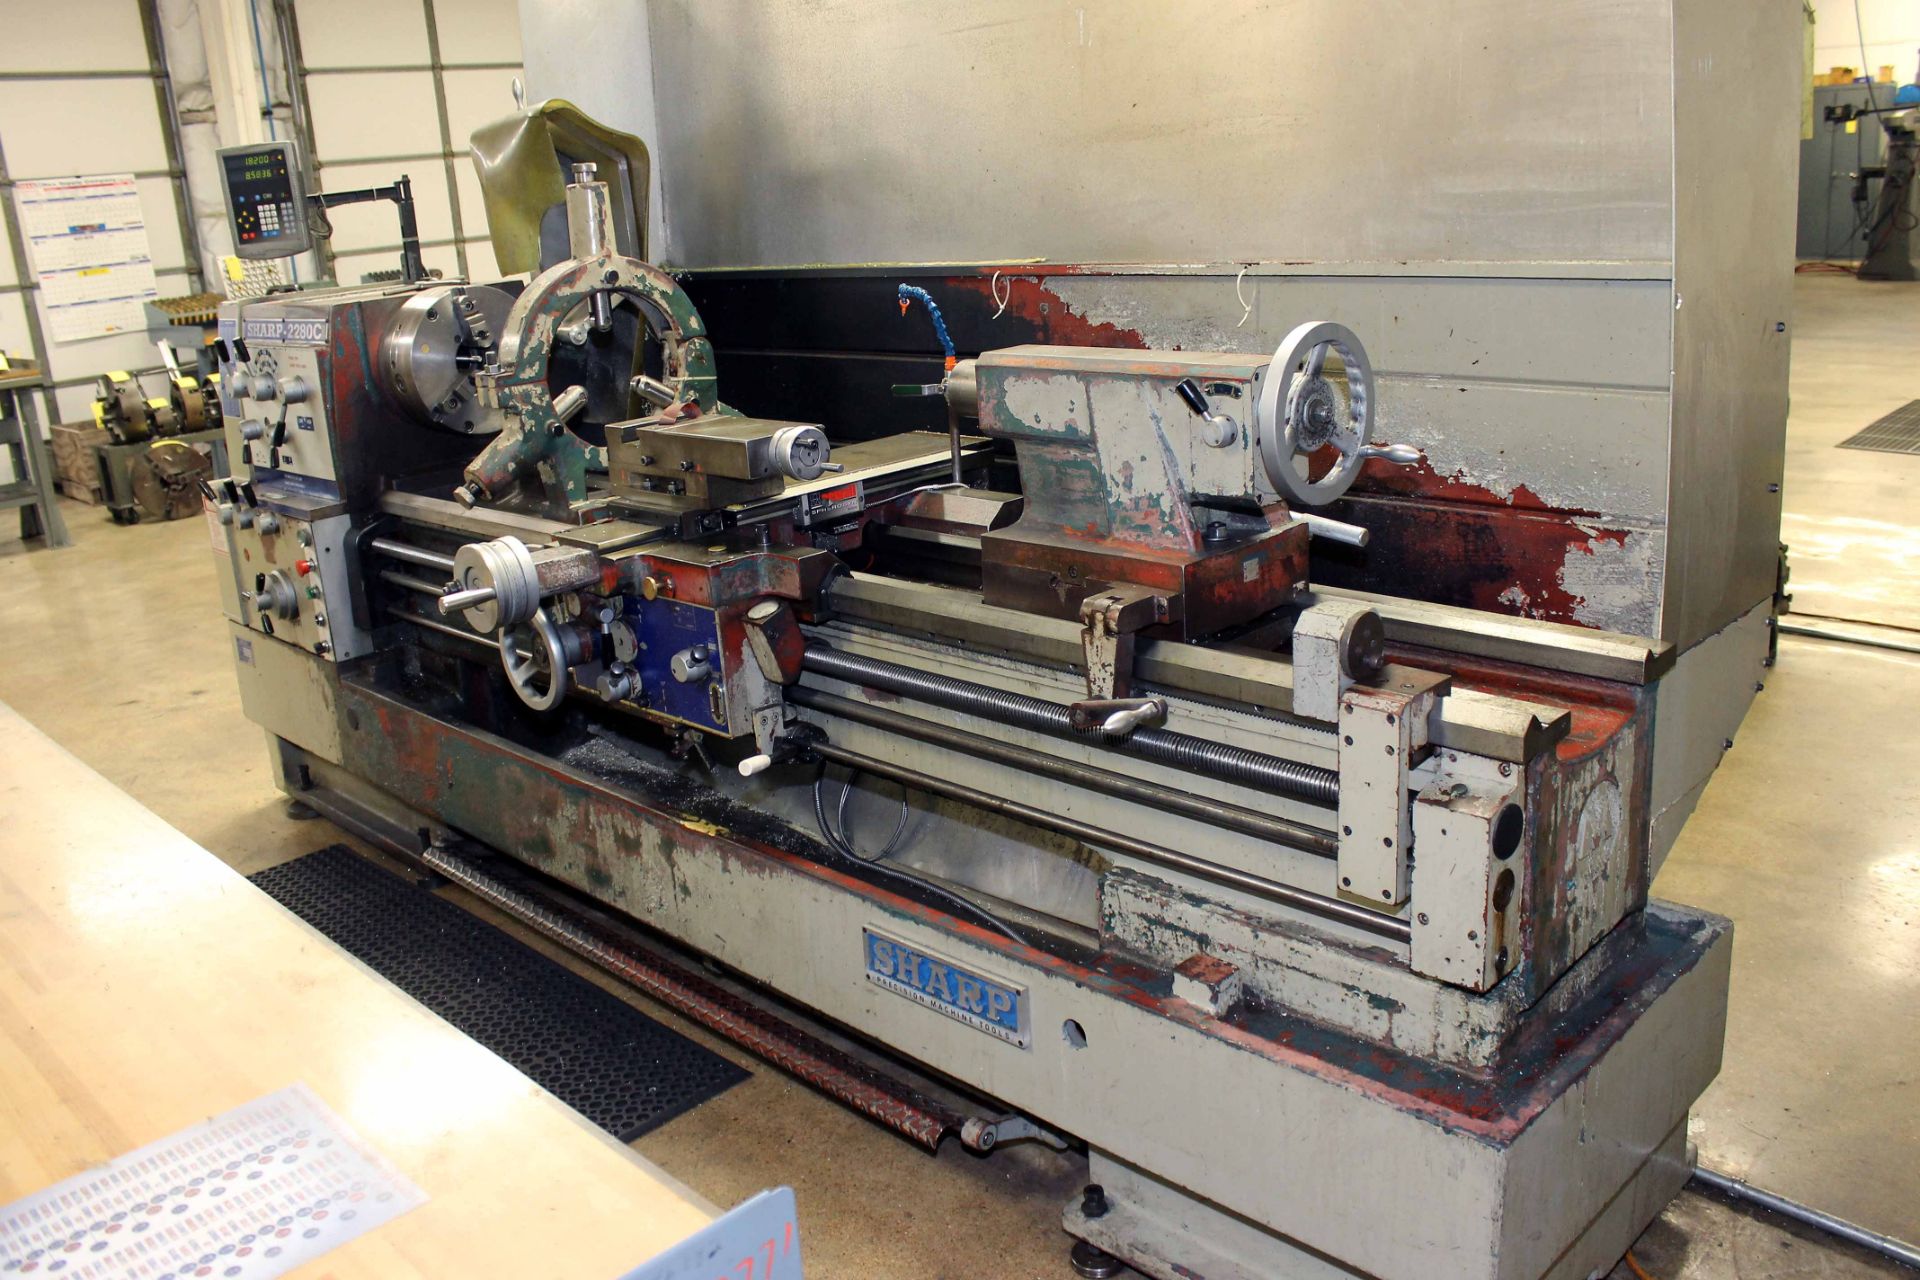 GAP BED ENGINE LATHE, SHARP 22" X 80" MDL. 2280X, spds: 15-1500 RPM, inch/metric thdng., taper - Image 2 of 2